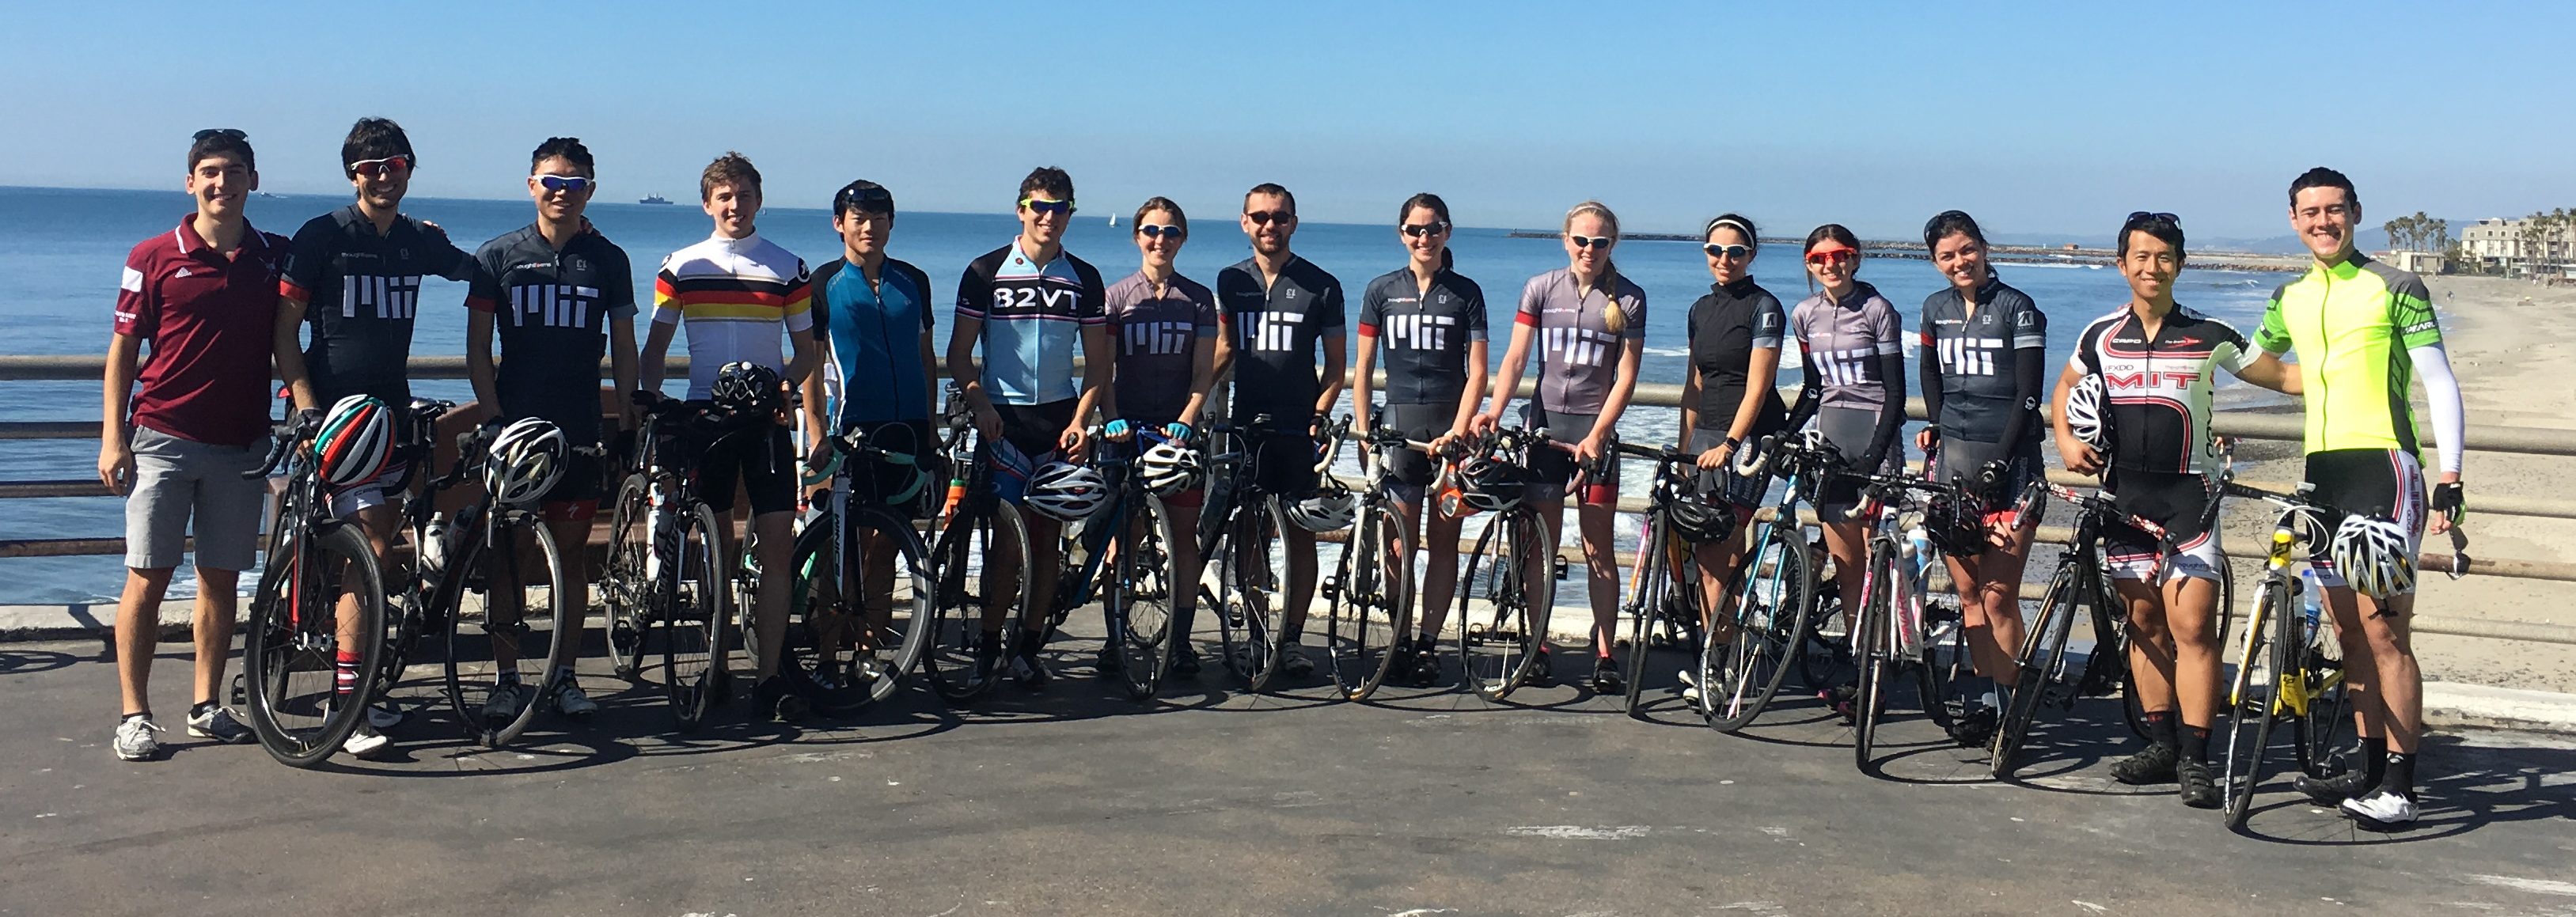 "MIT Cycling West", an outpost of MIT cyclists riding in better weather.